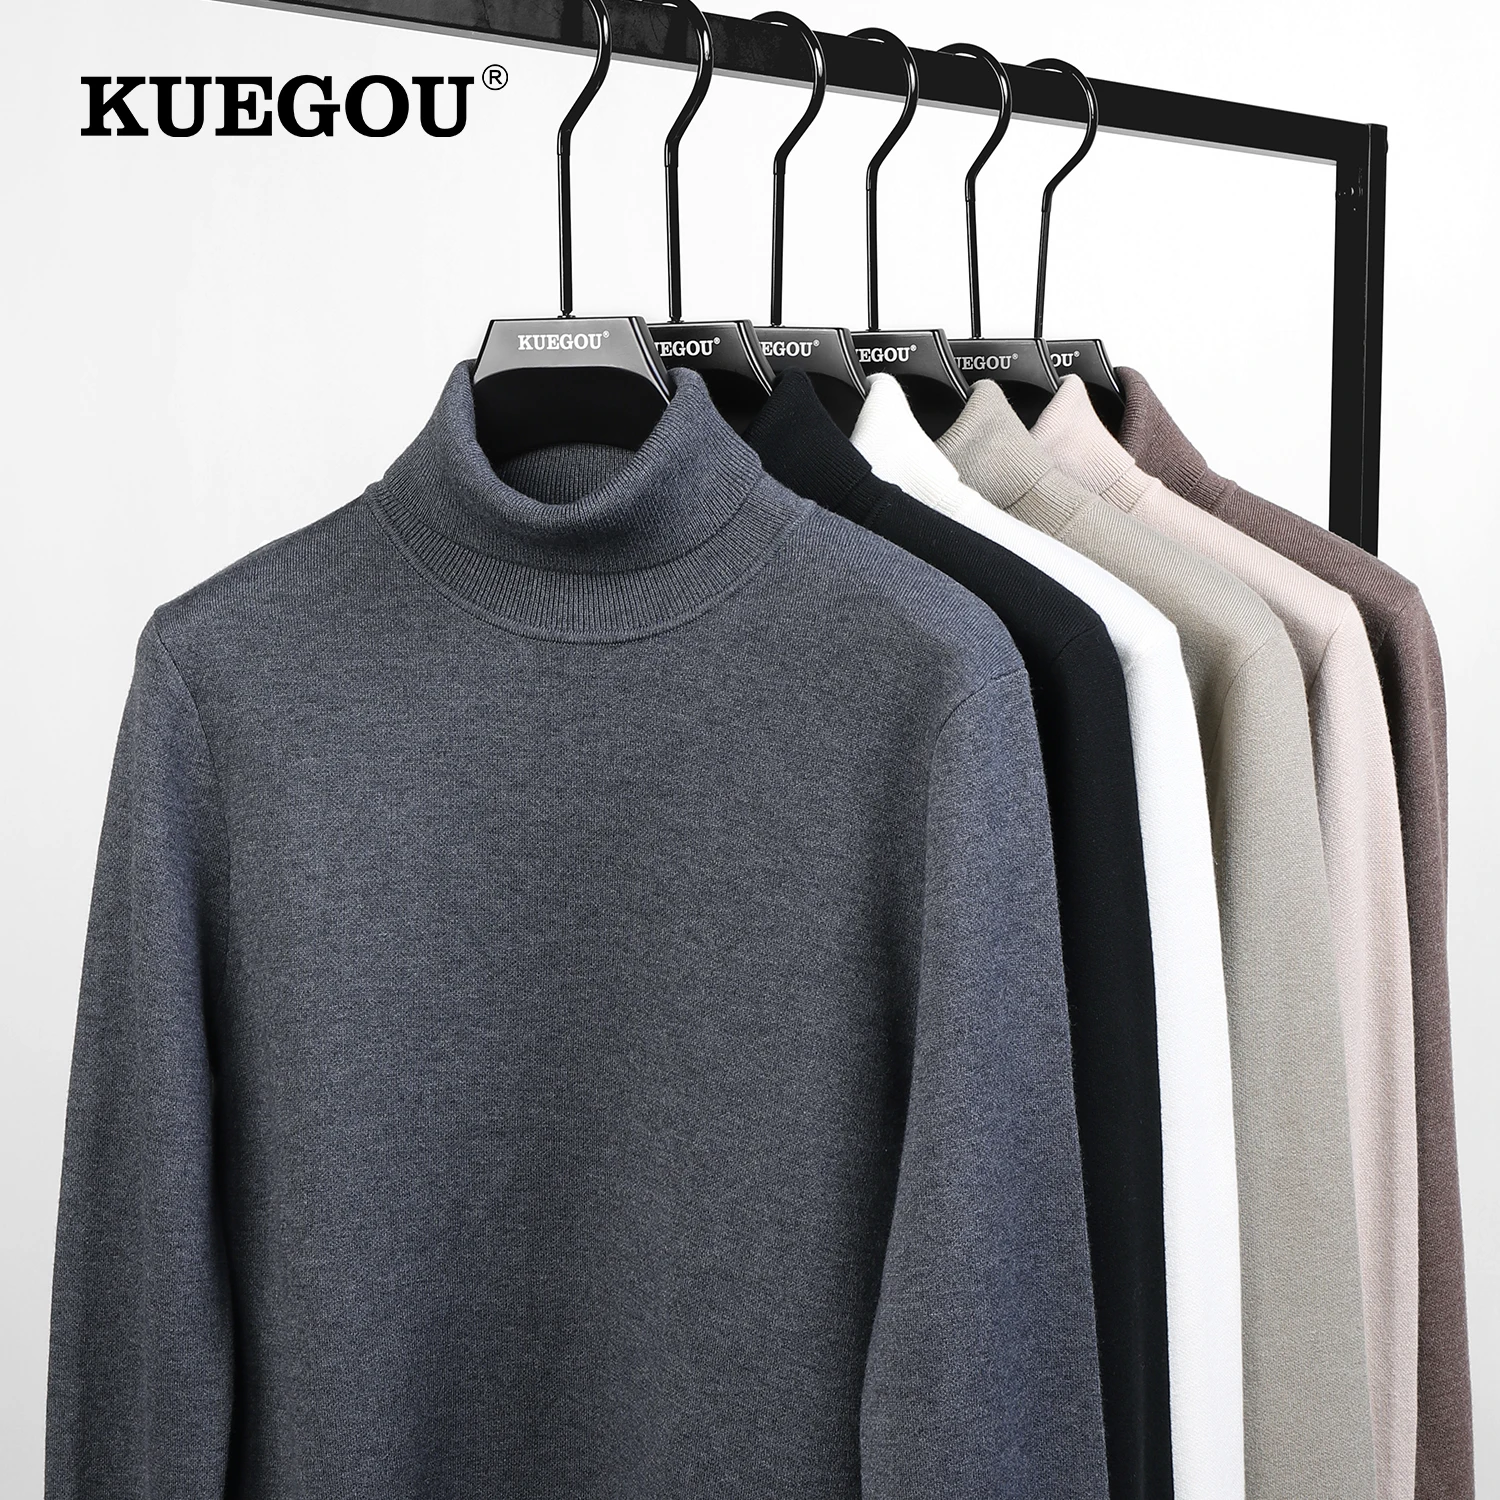 

KUEGOU 2022 Autumn Winter New Men's Turtleneck Sweater High Quality Jumper Slim Fit Male Knitting Pullovers Warm Plus Size DR01